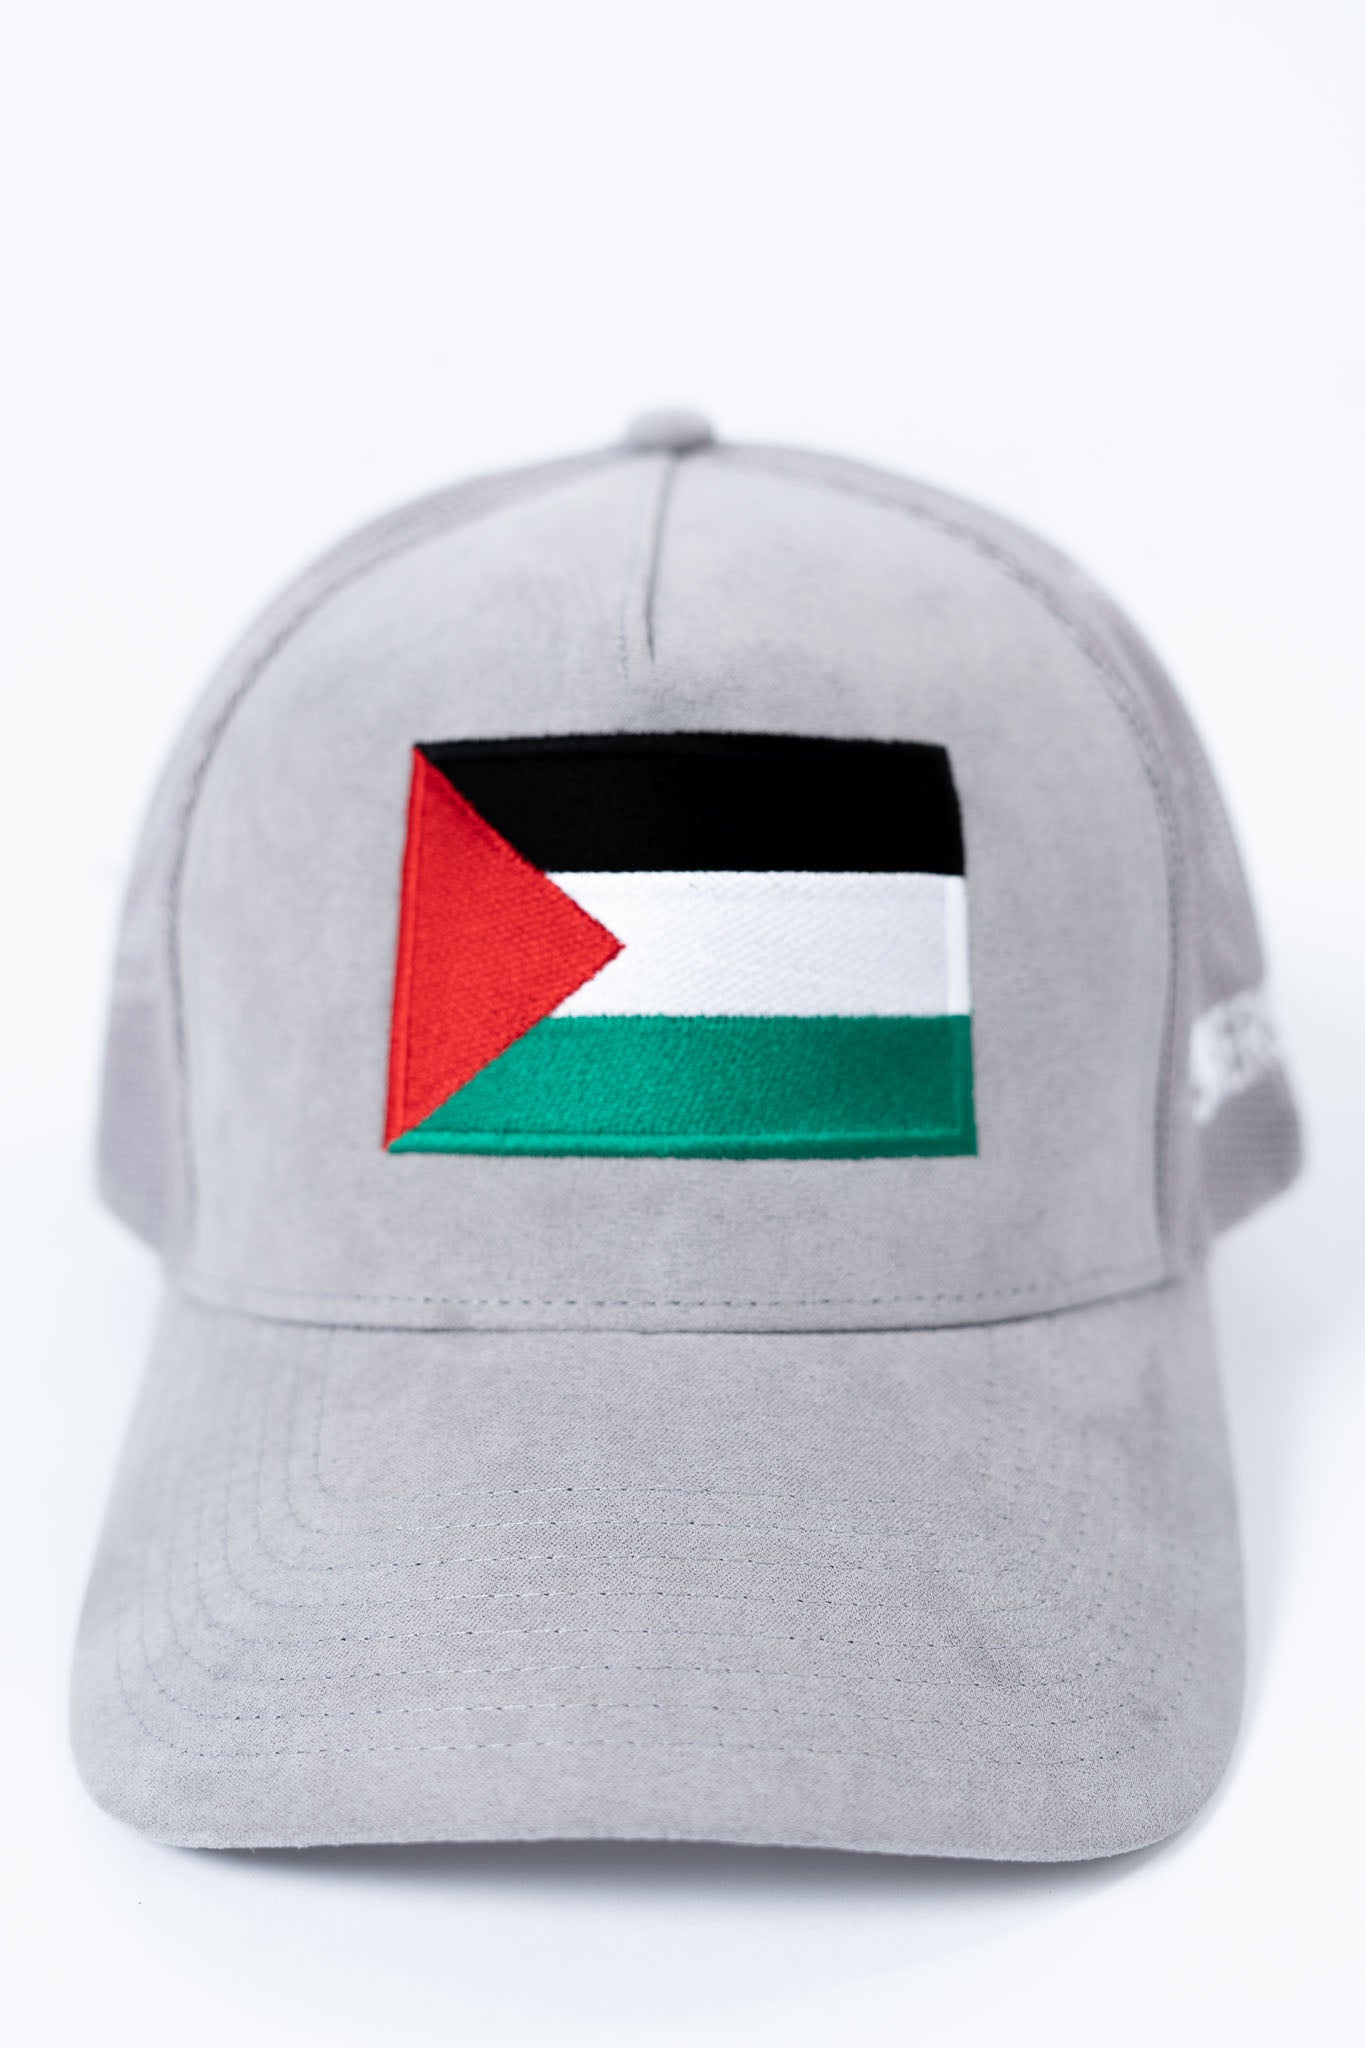 We Stand with Palestine - Light Grey Suede/Mesh Caps